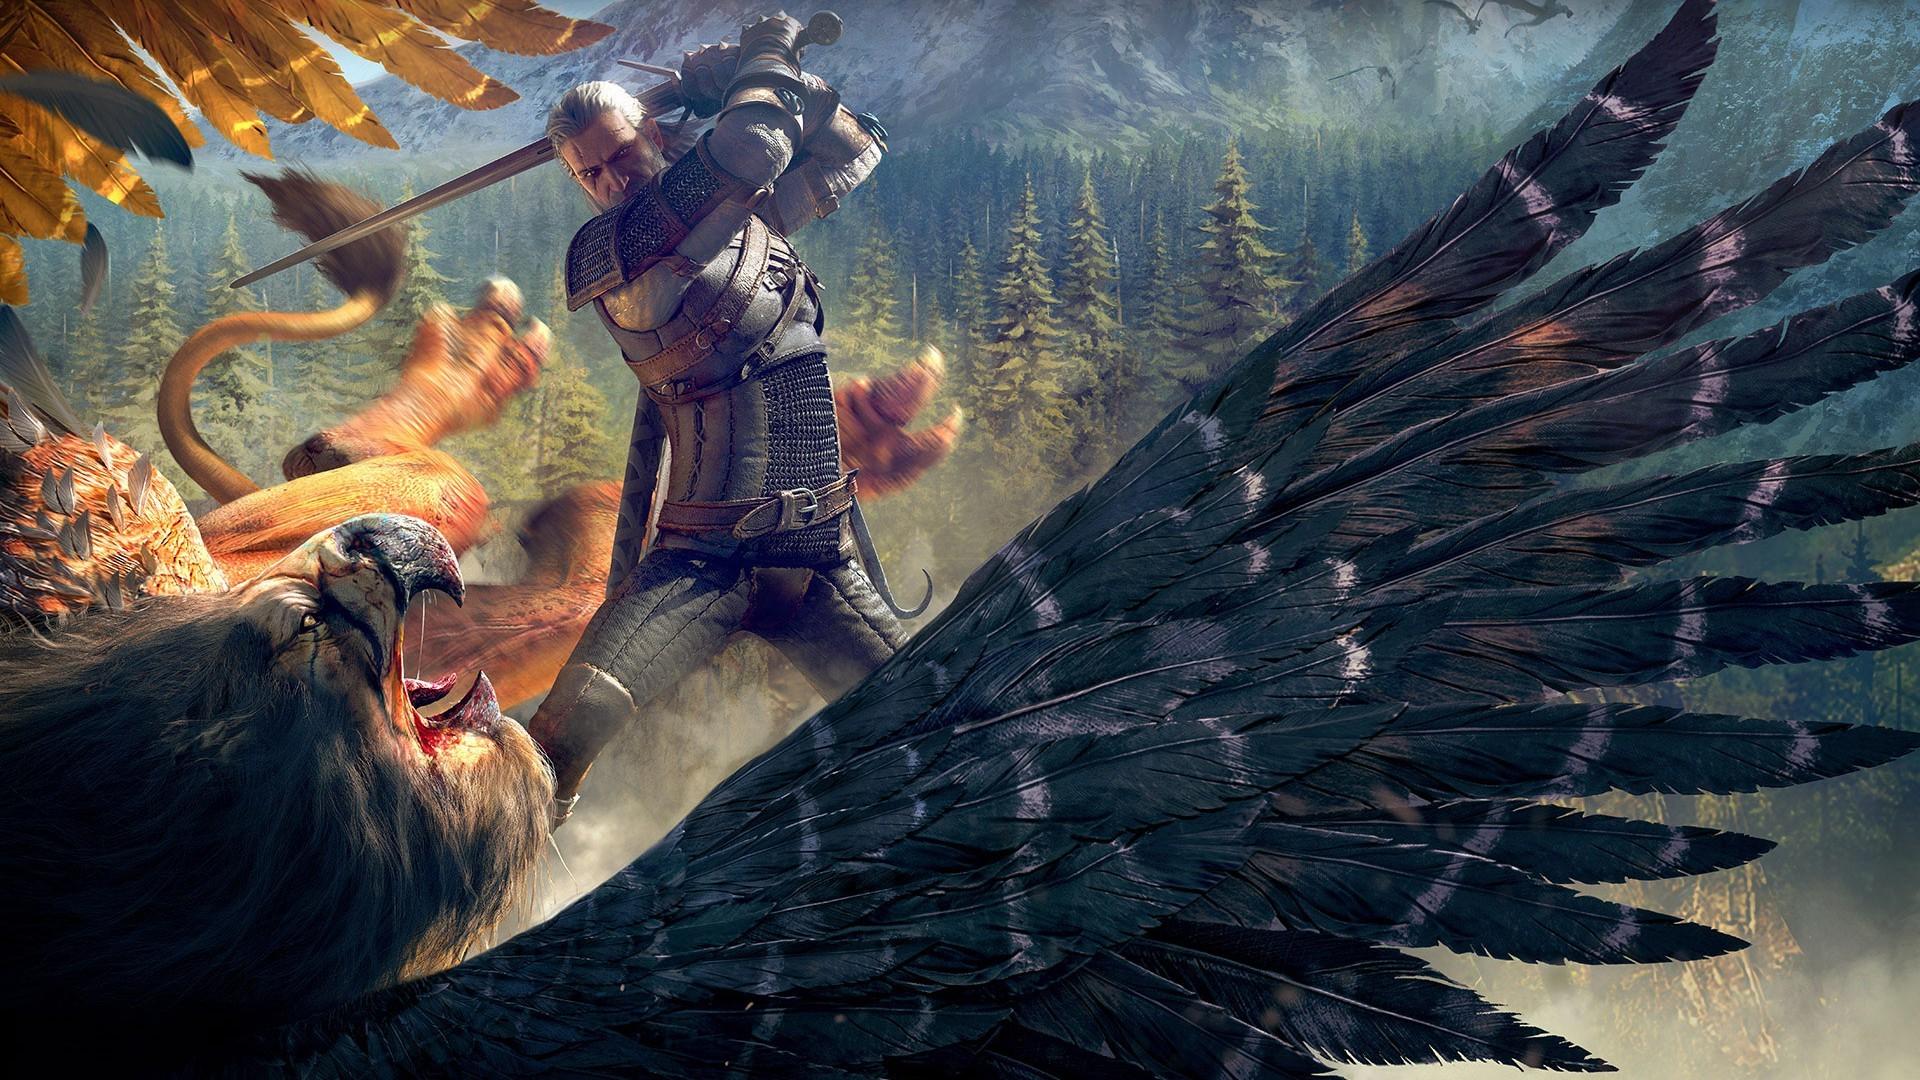 video Games, The Witcher 3: Wild Hunt Wallpaper HD